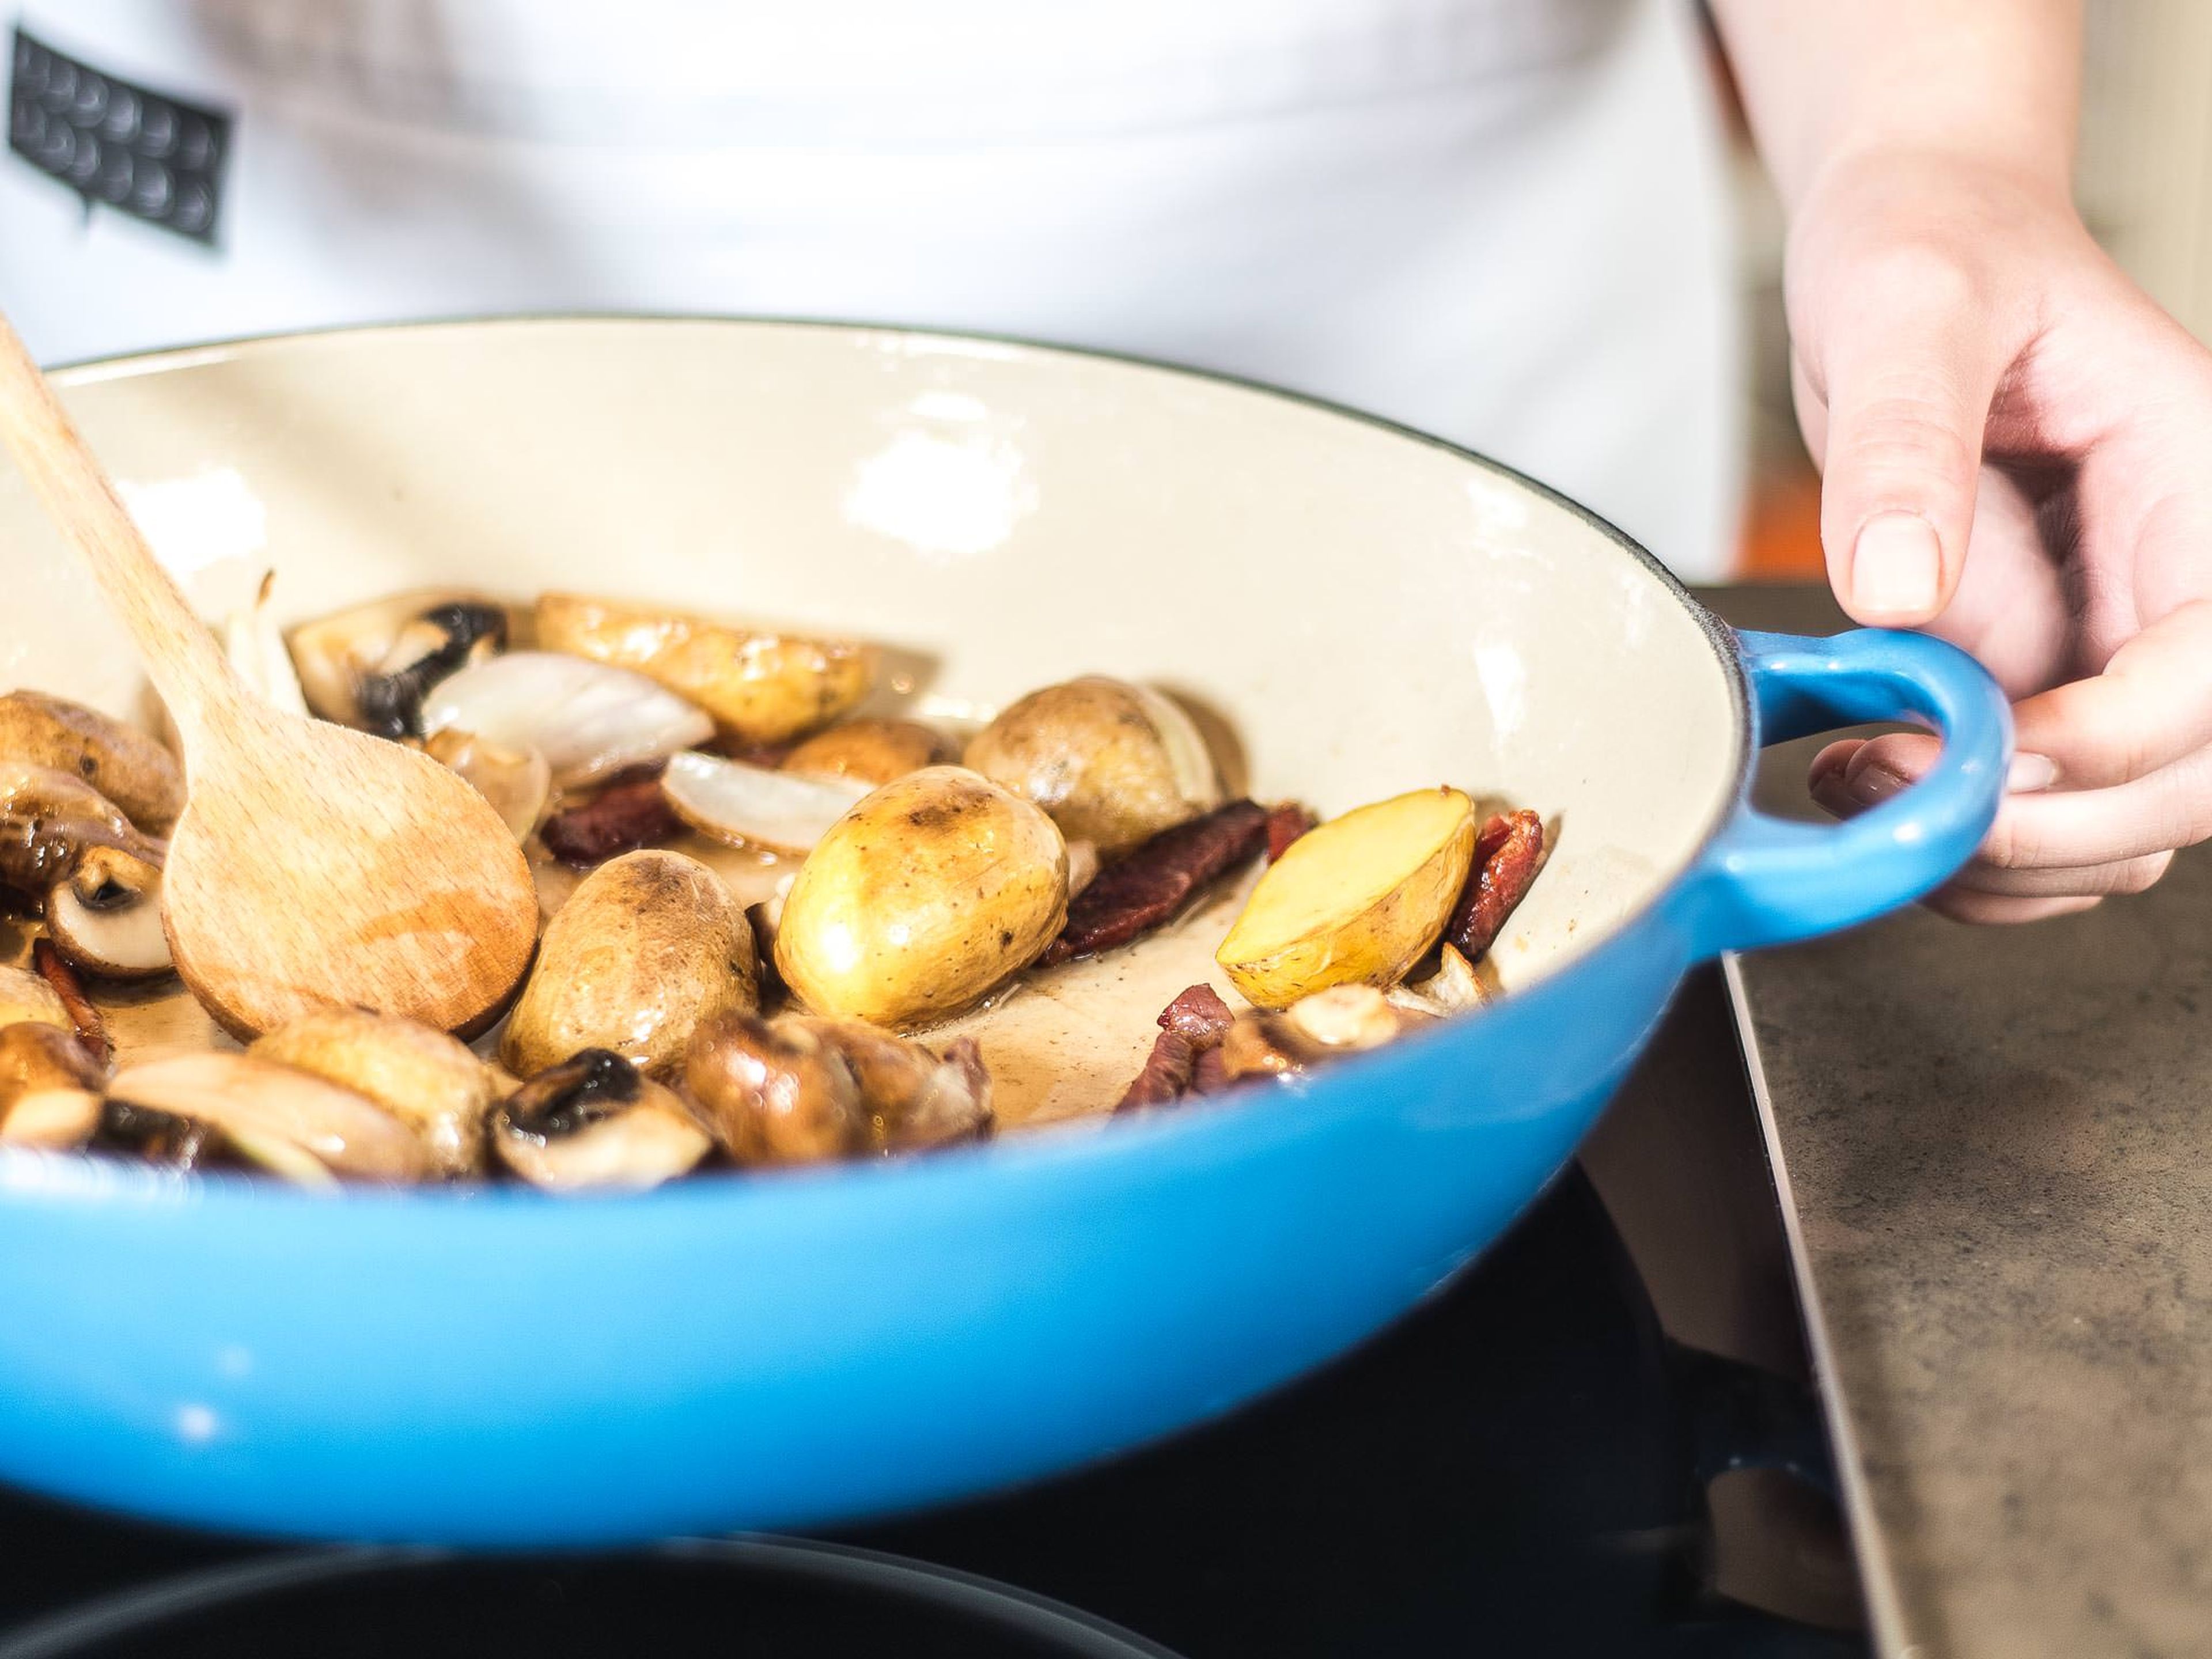 Melt butter in a sauce pan and sauté bacon, mushrooms, shallots and potatoes, lightly season with salt and pepper. Then remove from pan and put aside.